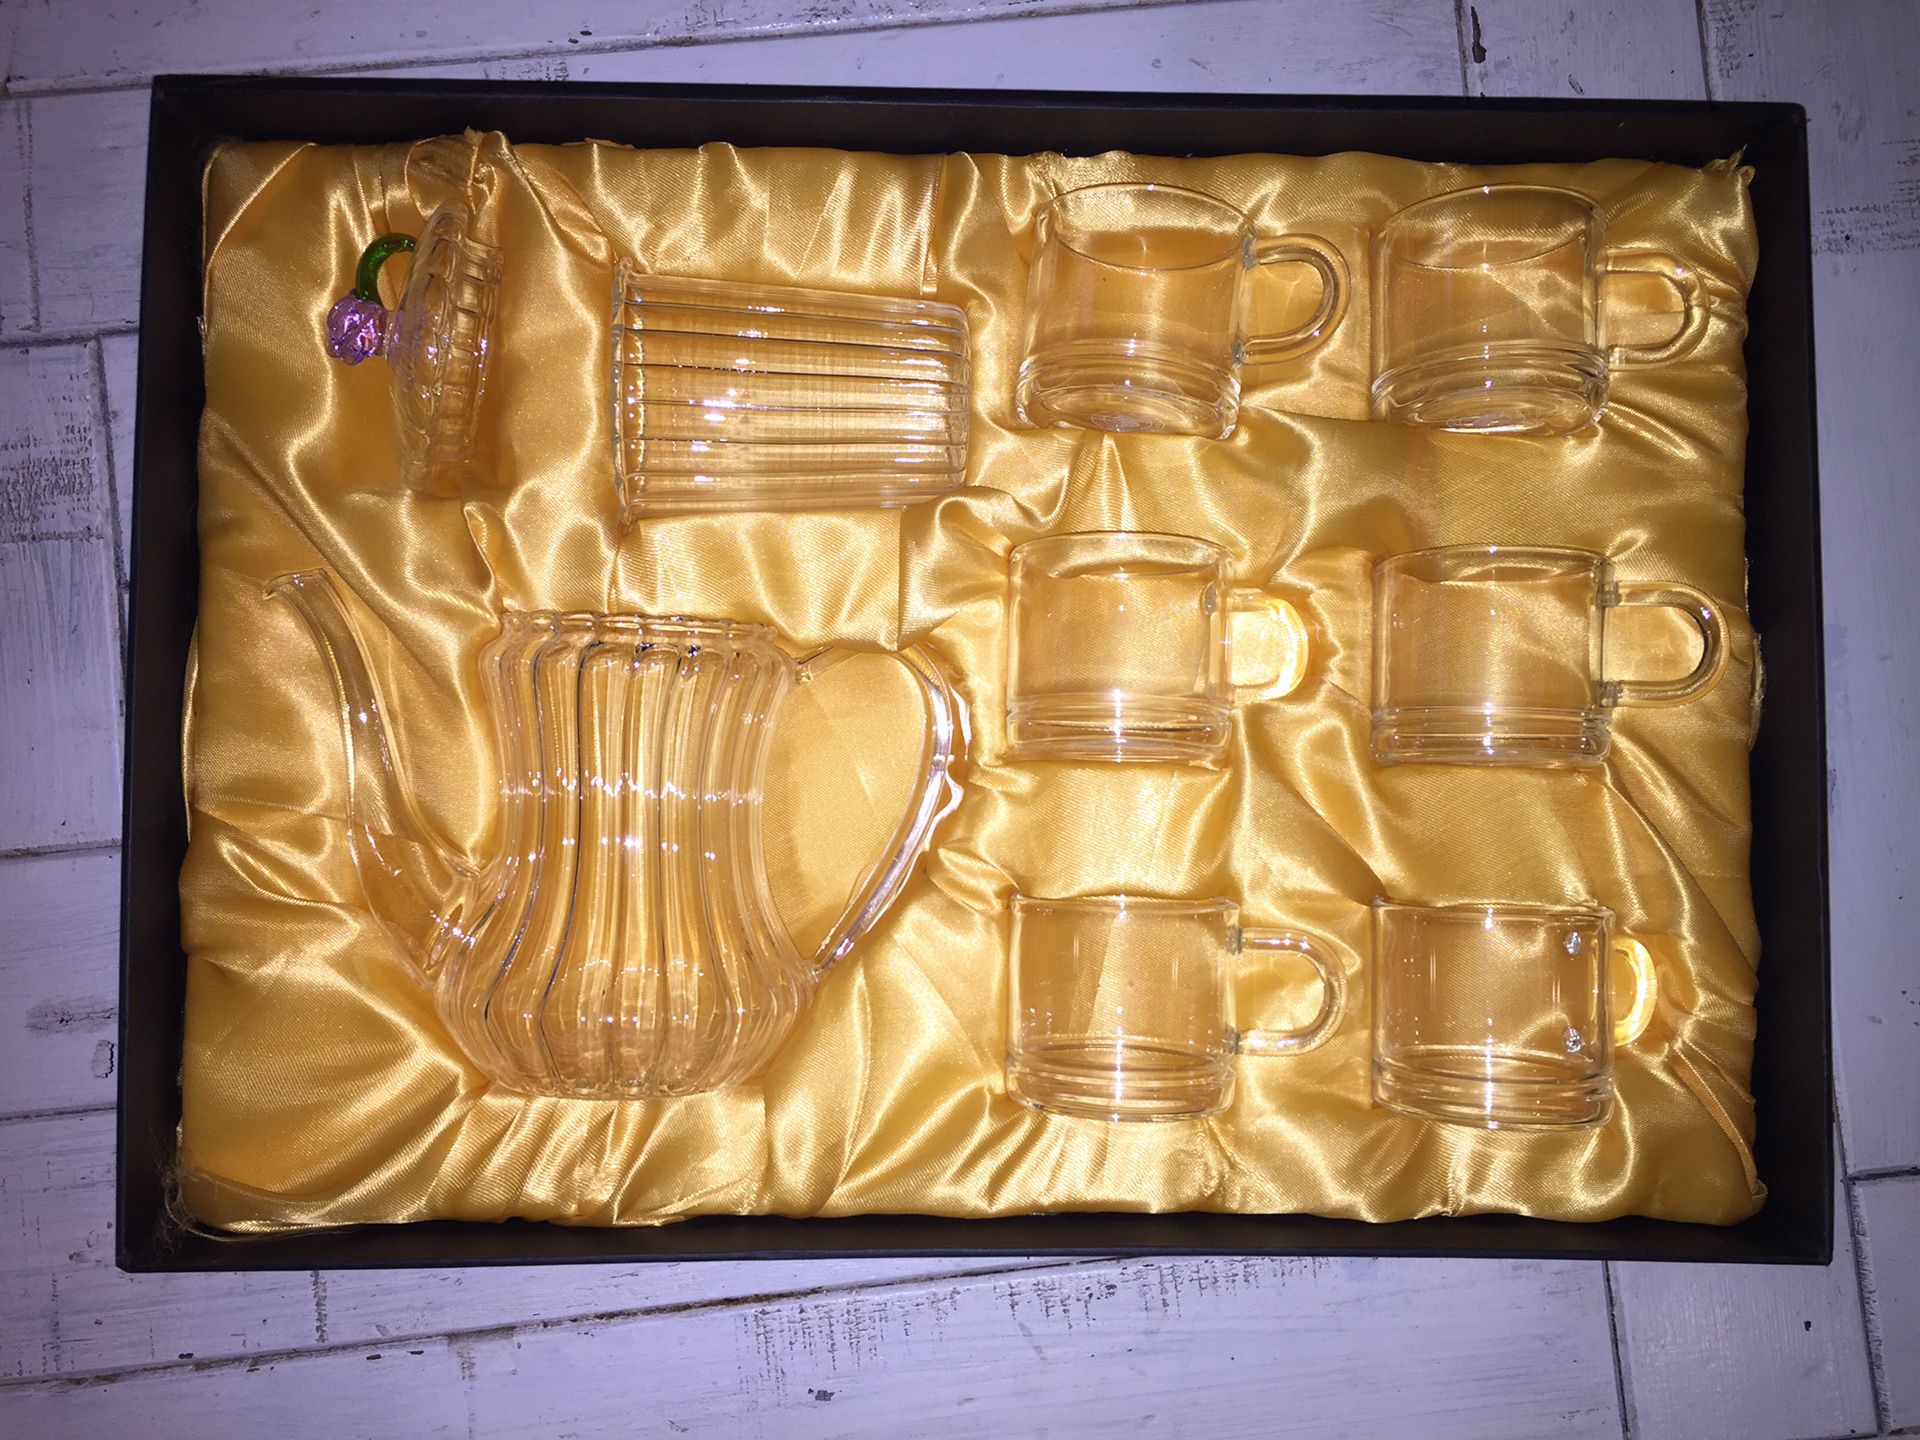 Glass tea set new in box never used